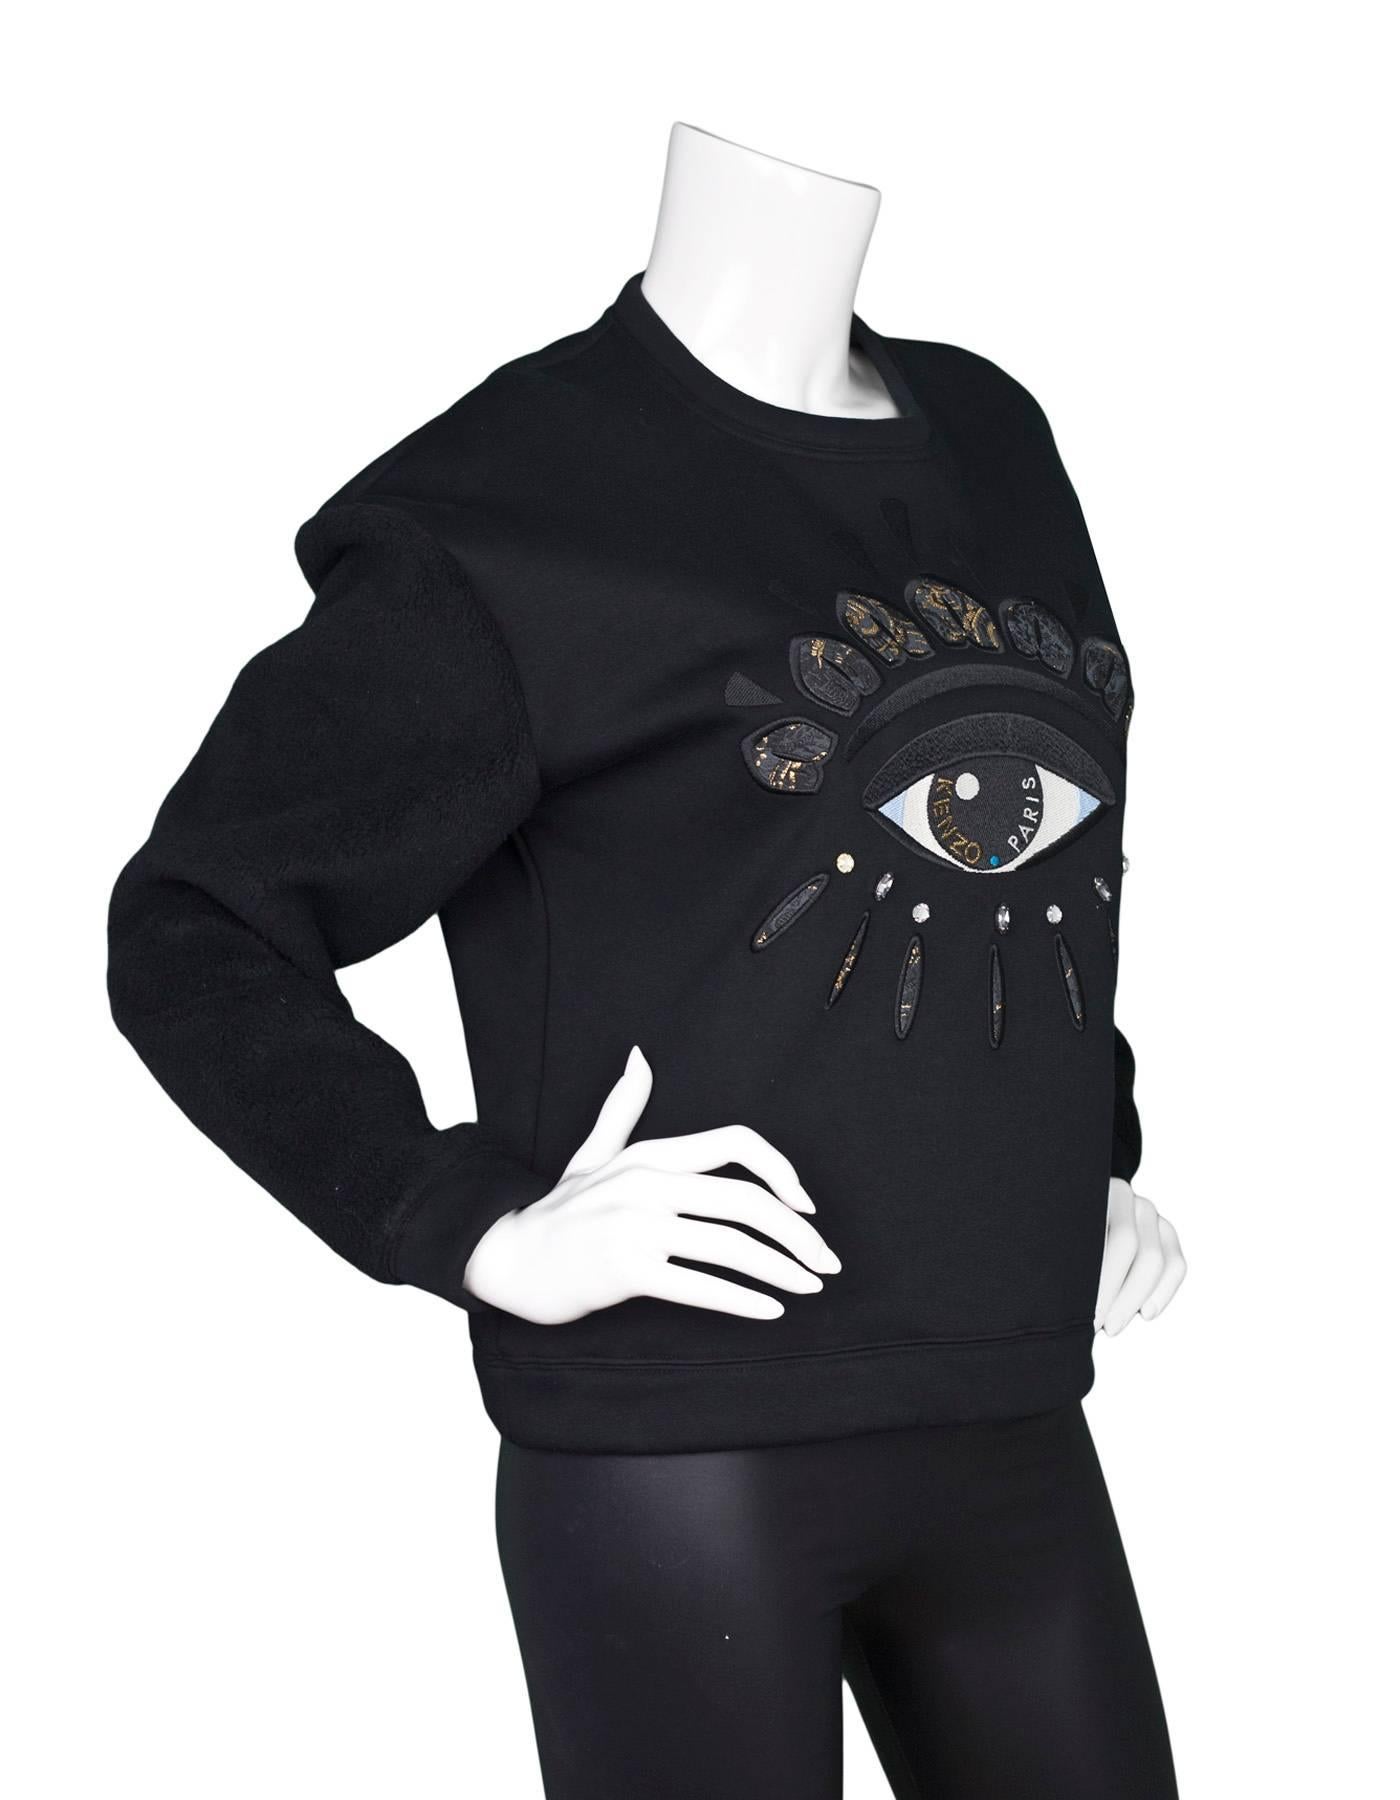 Kenzo Black Eye Embellished Sweatshirt Sz S
Features fleece-like sleeves

Made In: Portugal
Color: Black
Composition: 60% Polyester, 38% Cotton, 2% Elastane
Closure/Opening: Pull-over
Retail Price: $470 + tax
Overall Condition: Excellent pre-owned